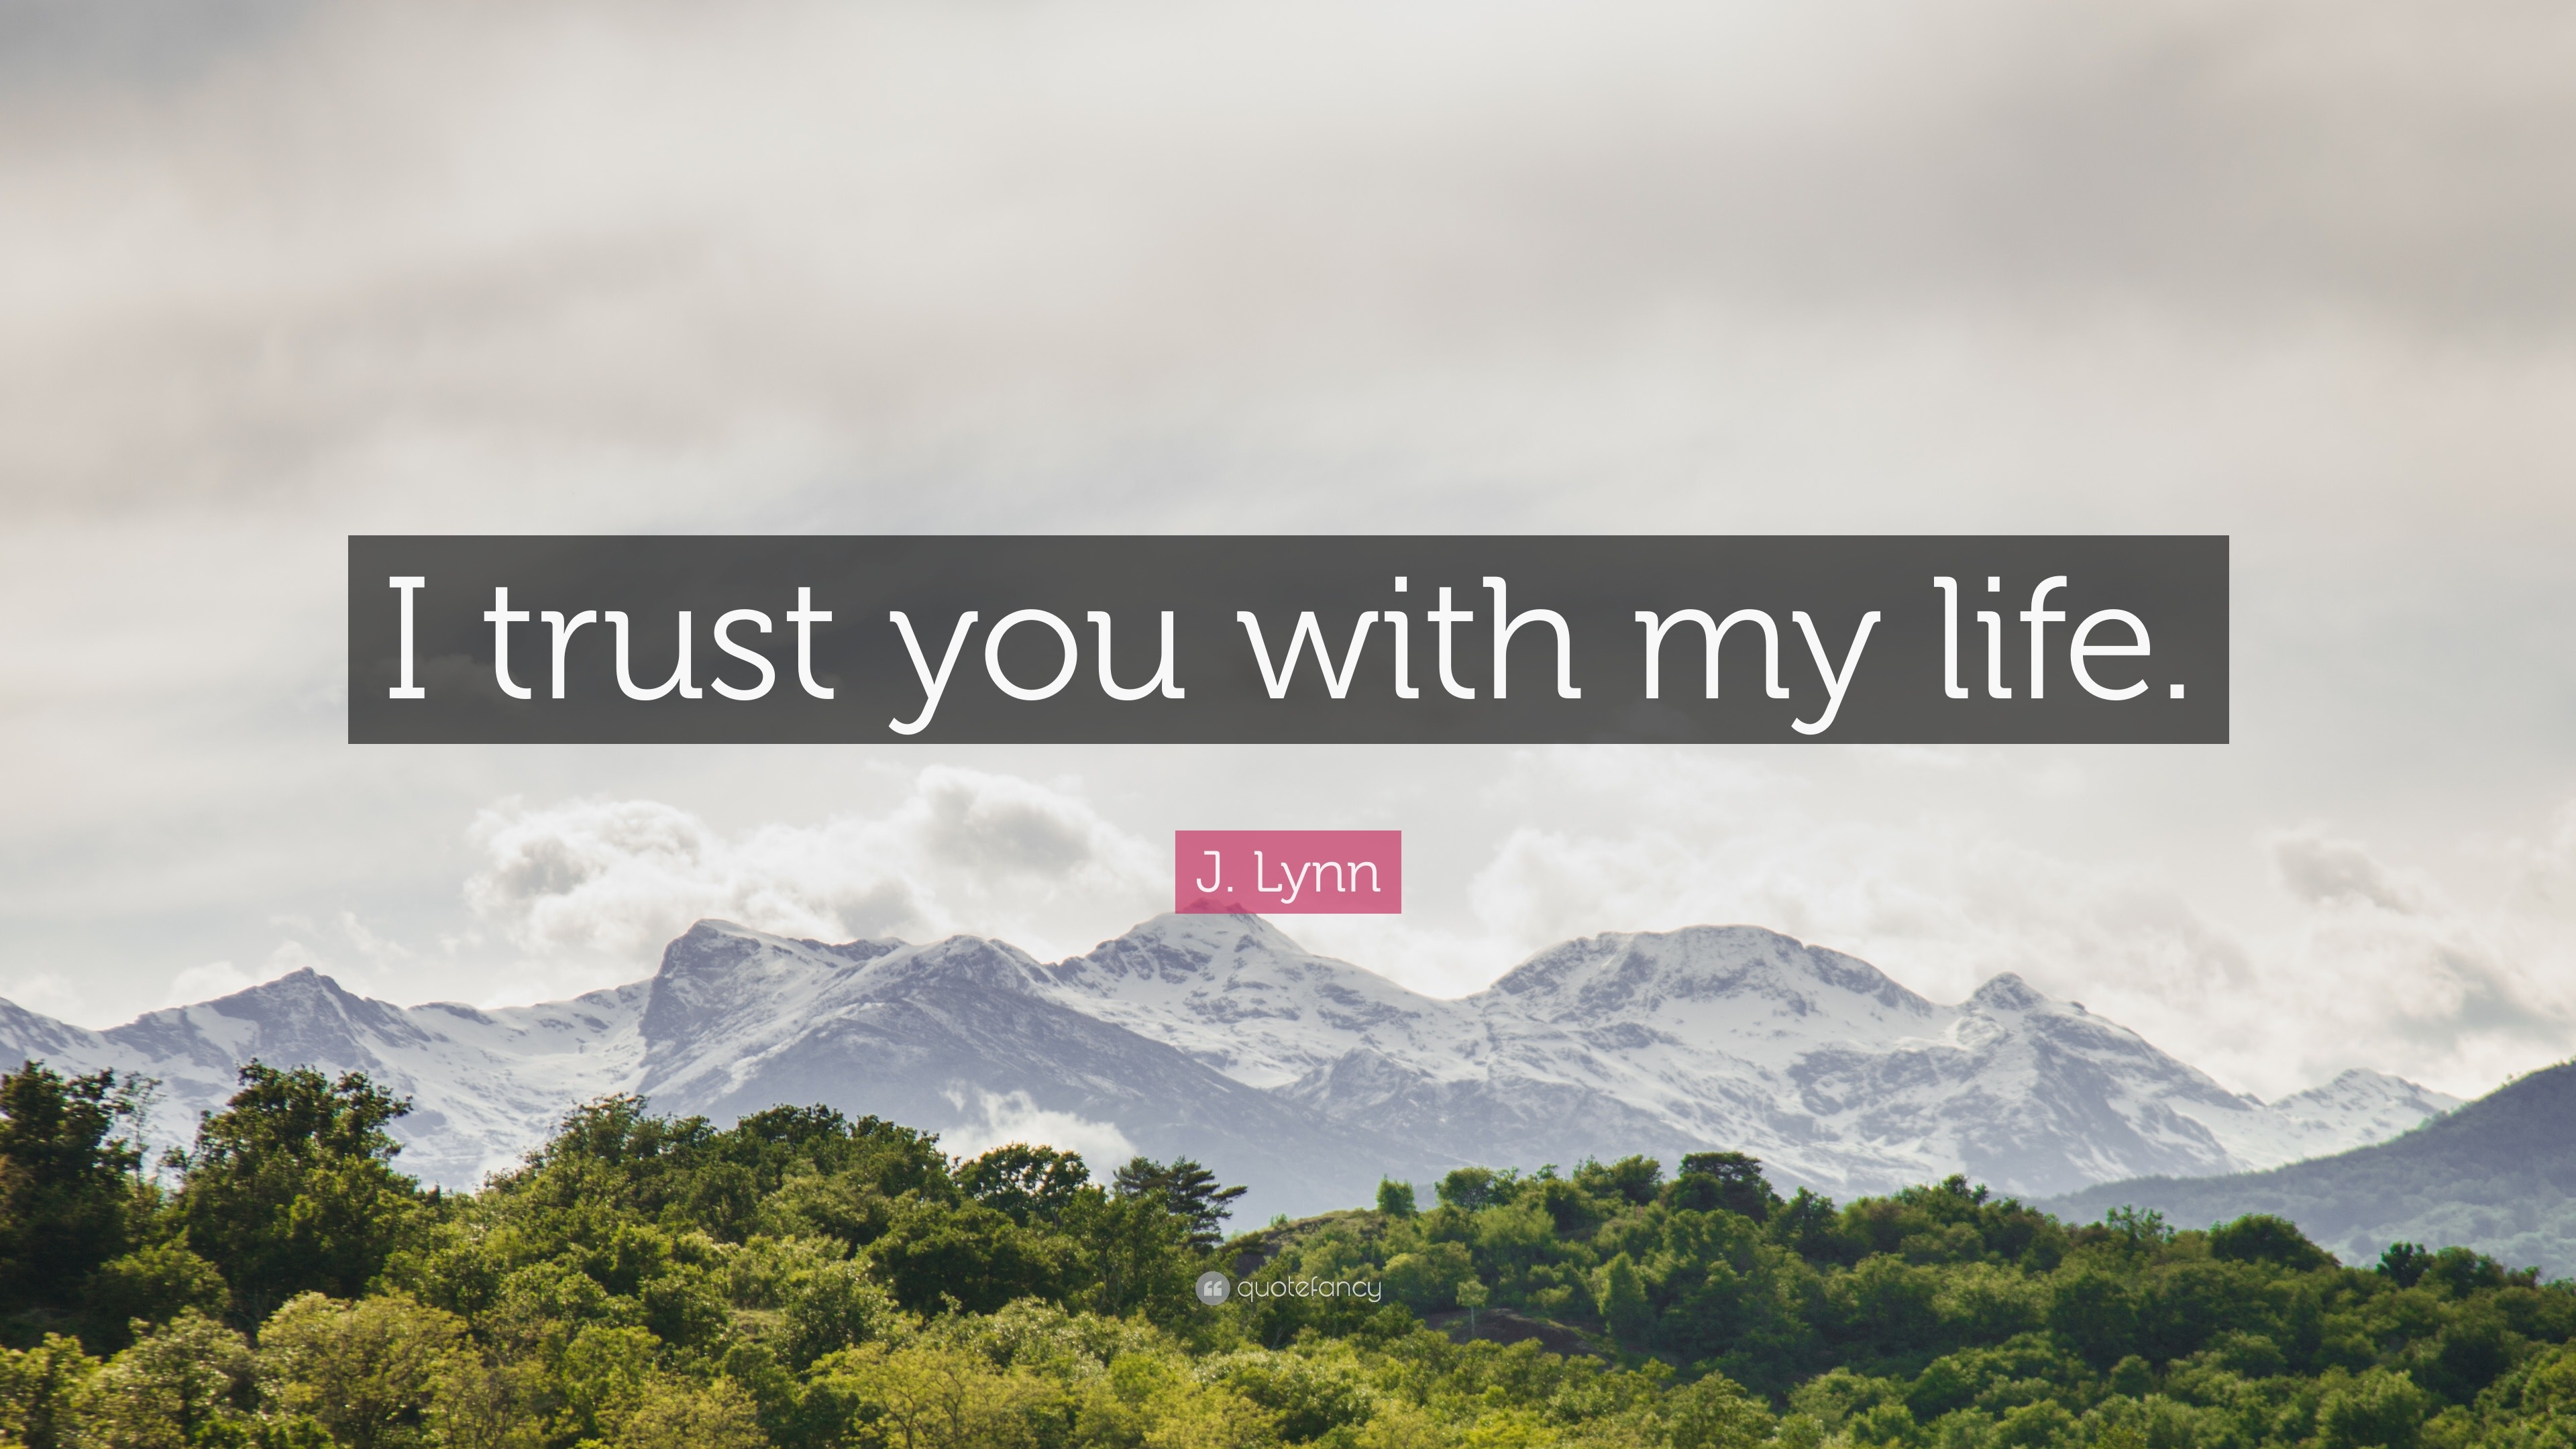 J Lynn Quote “I trust you with my life ”